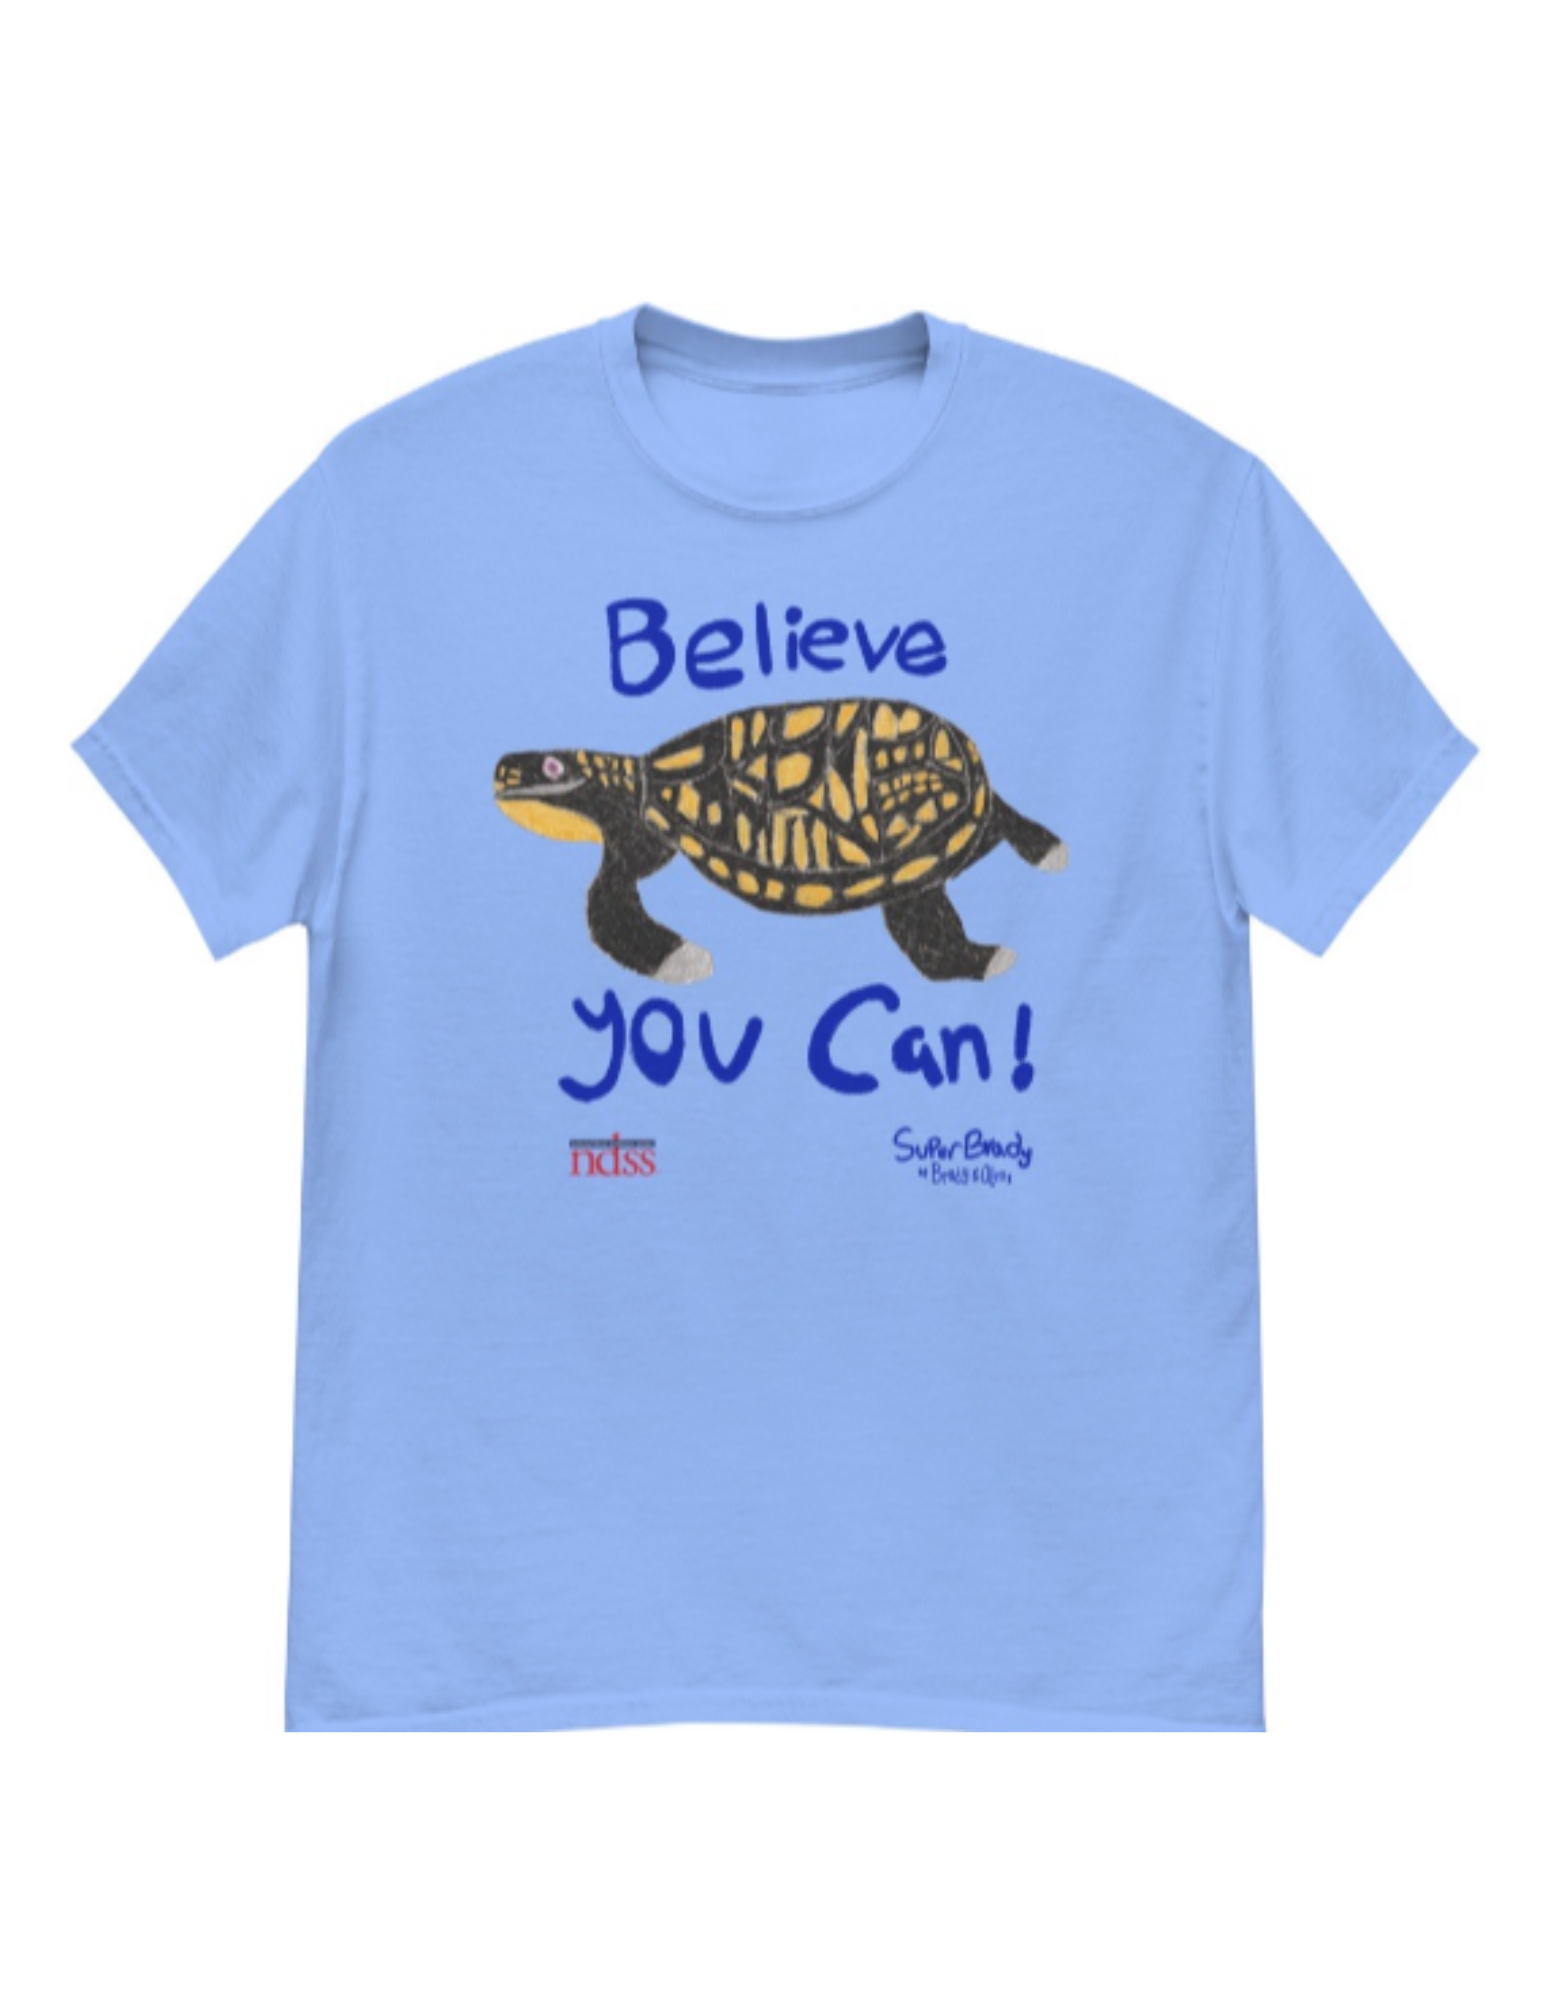 superbrady tshirt with turtle saying "believe you can!"